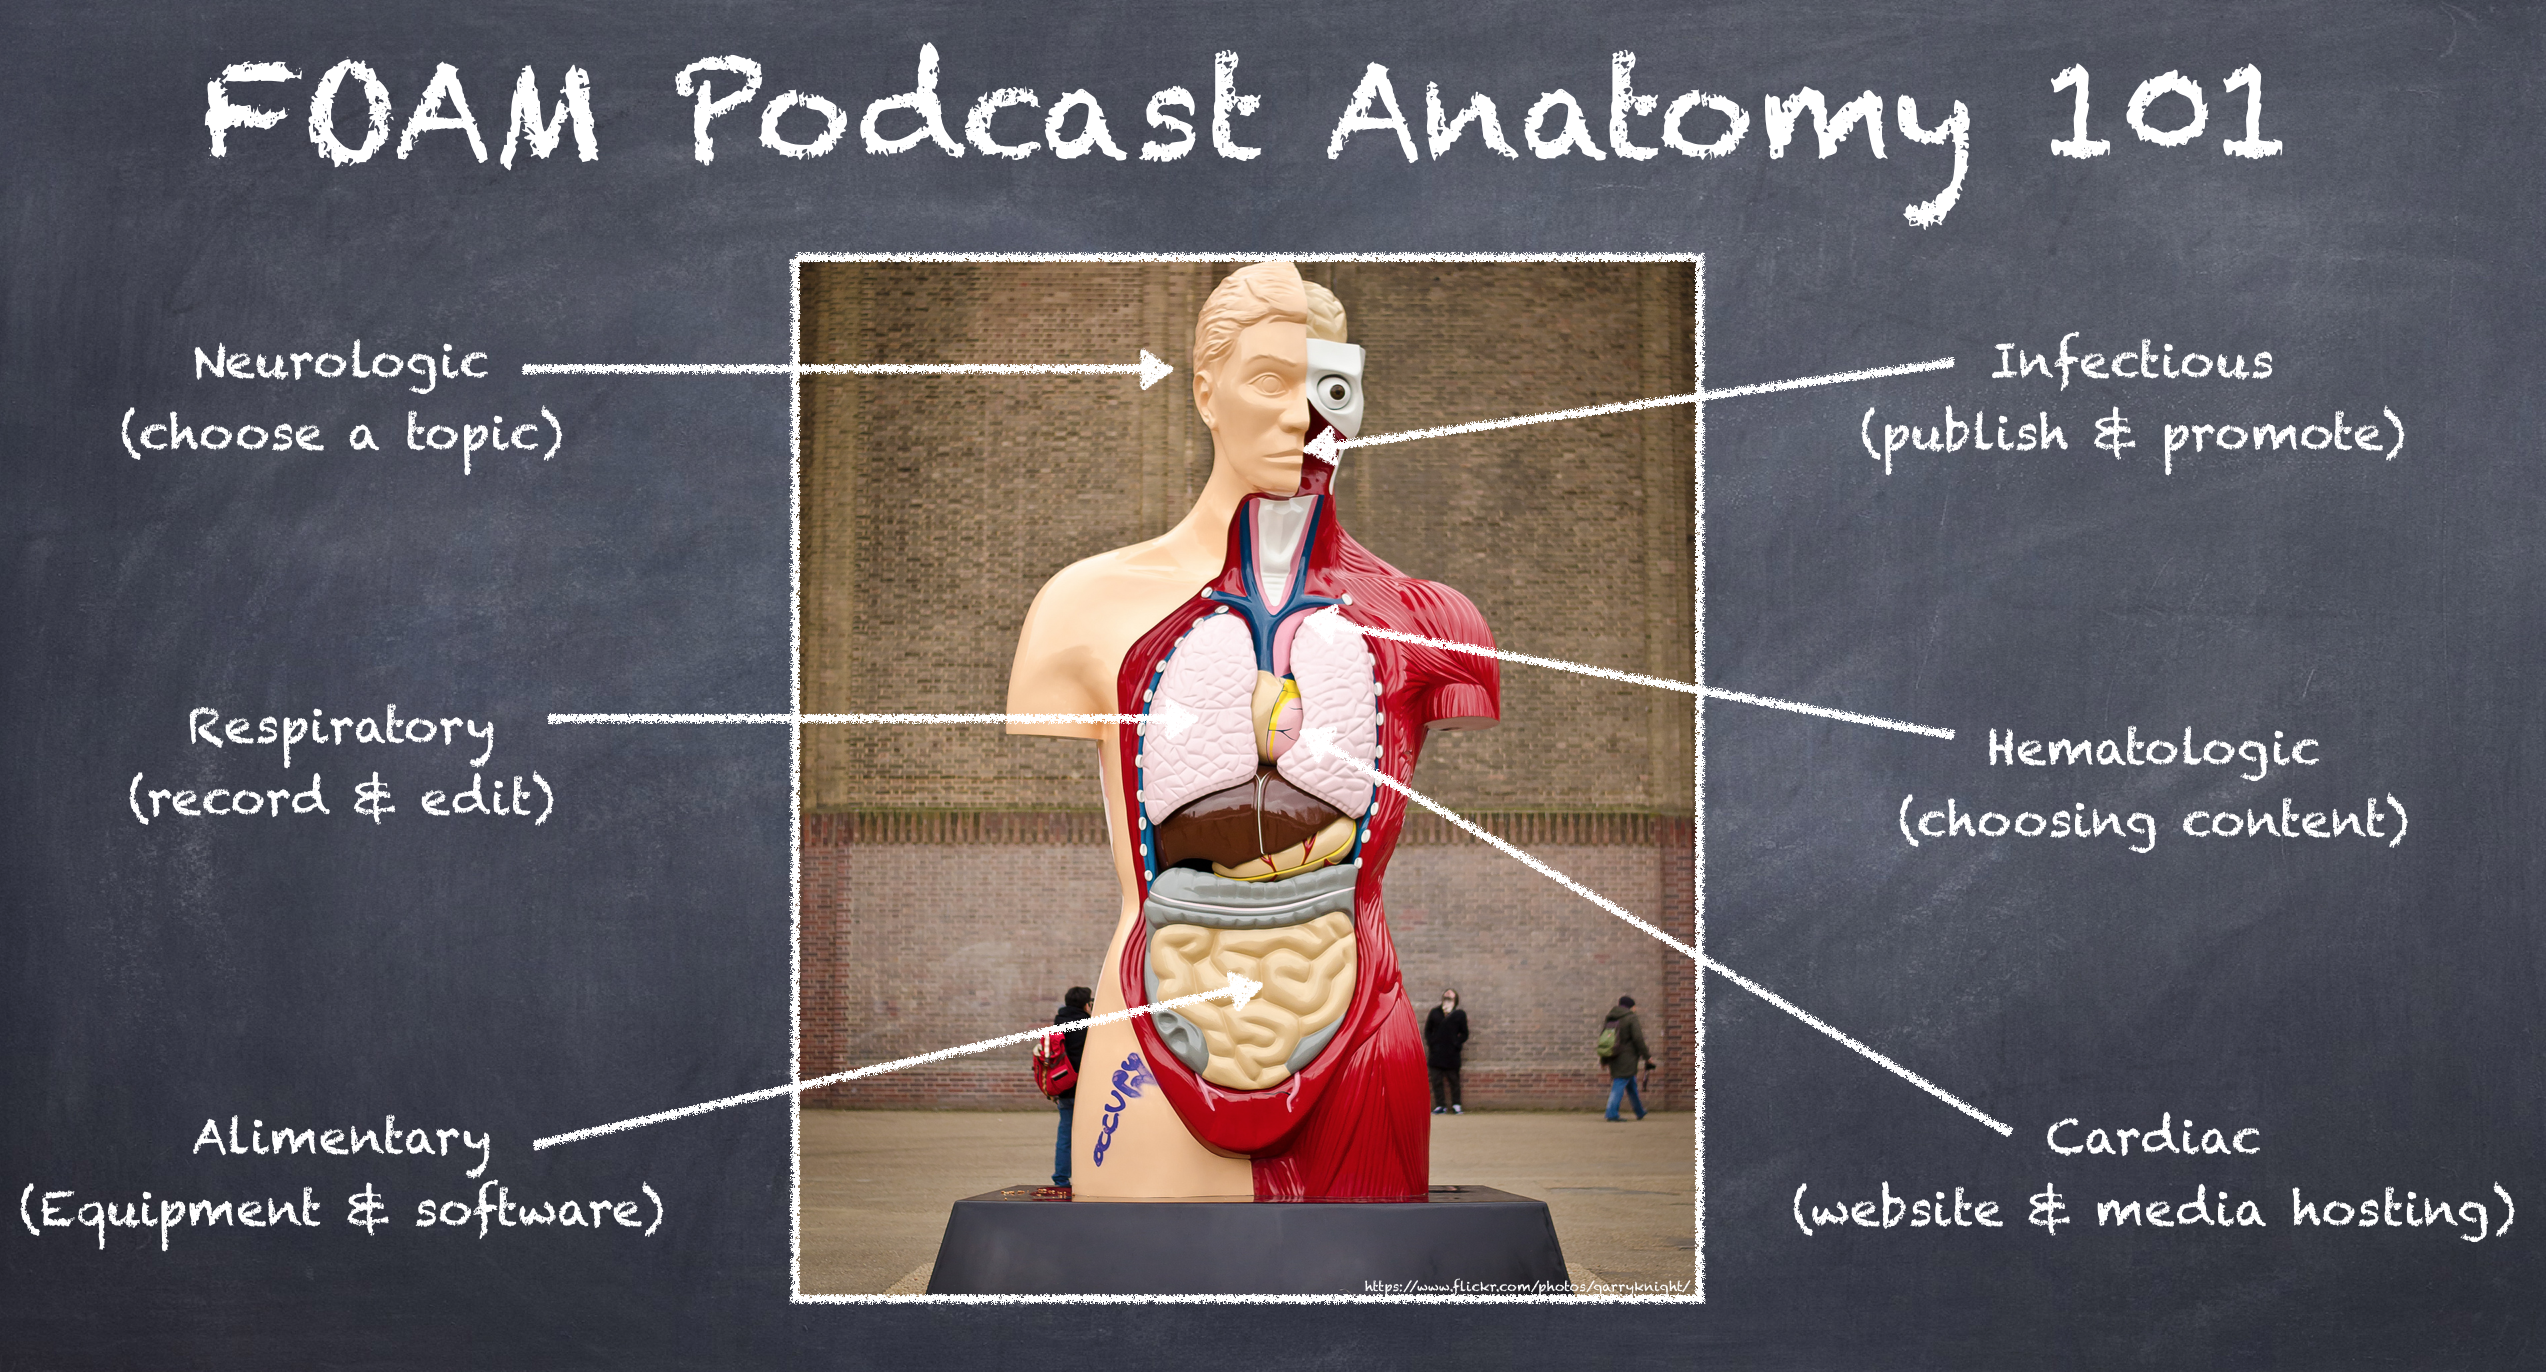 5: Flatten the learning curve to starting a medical podcast